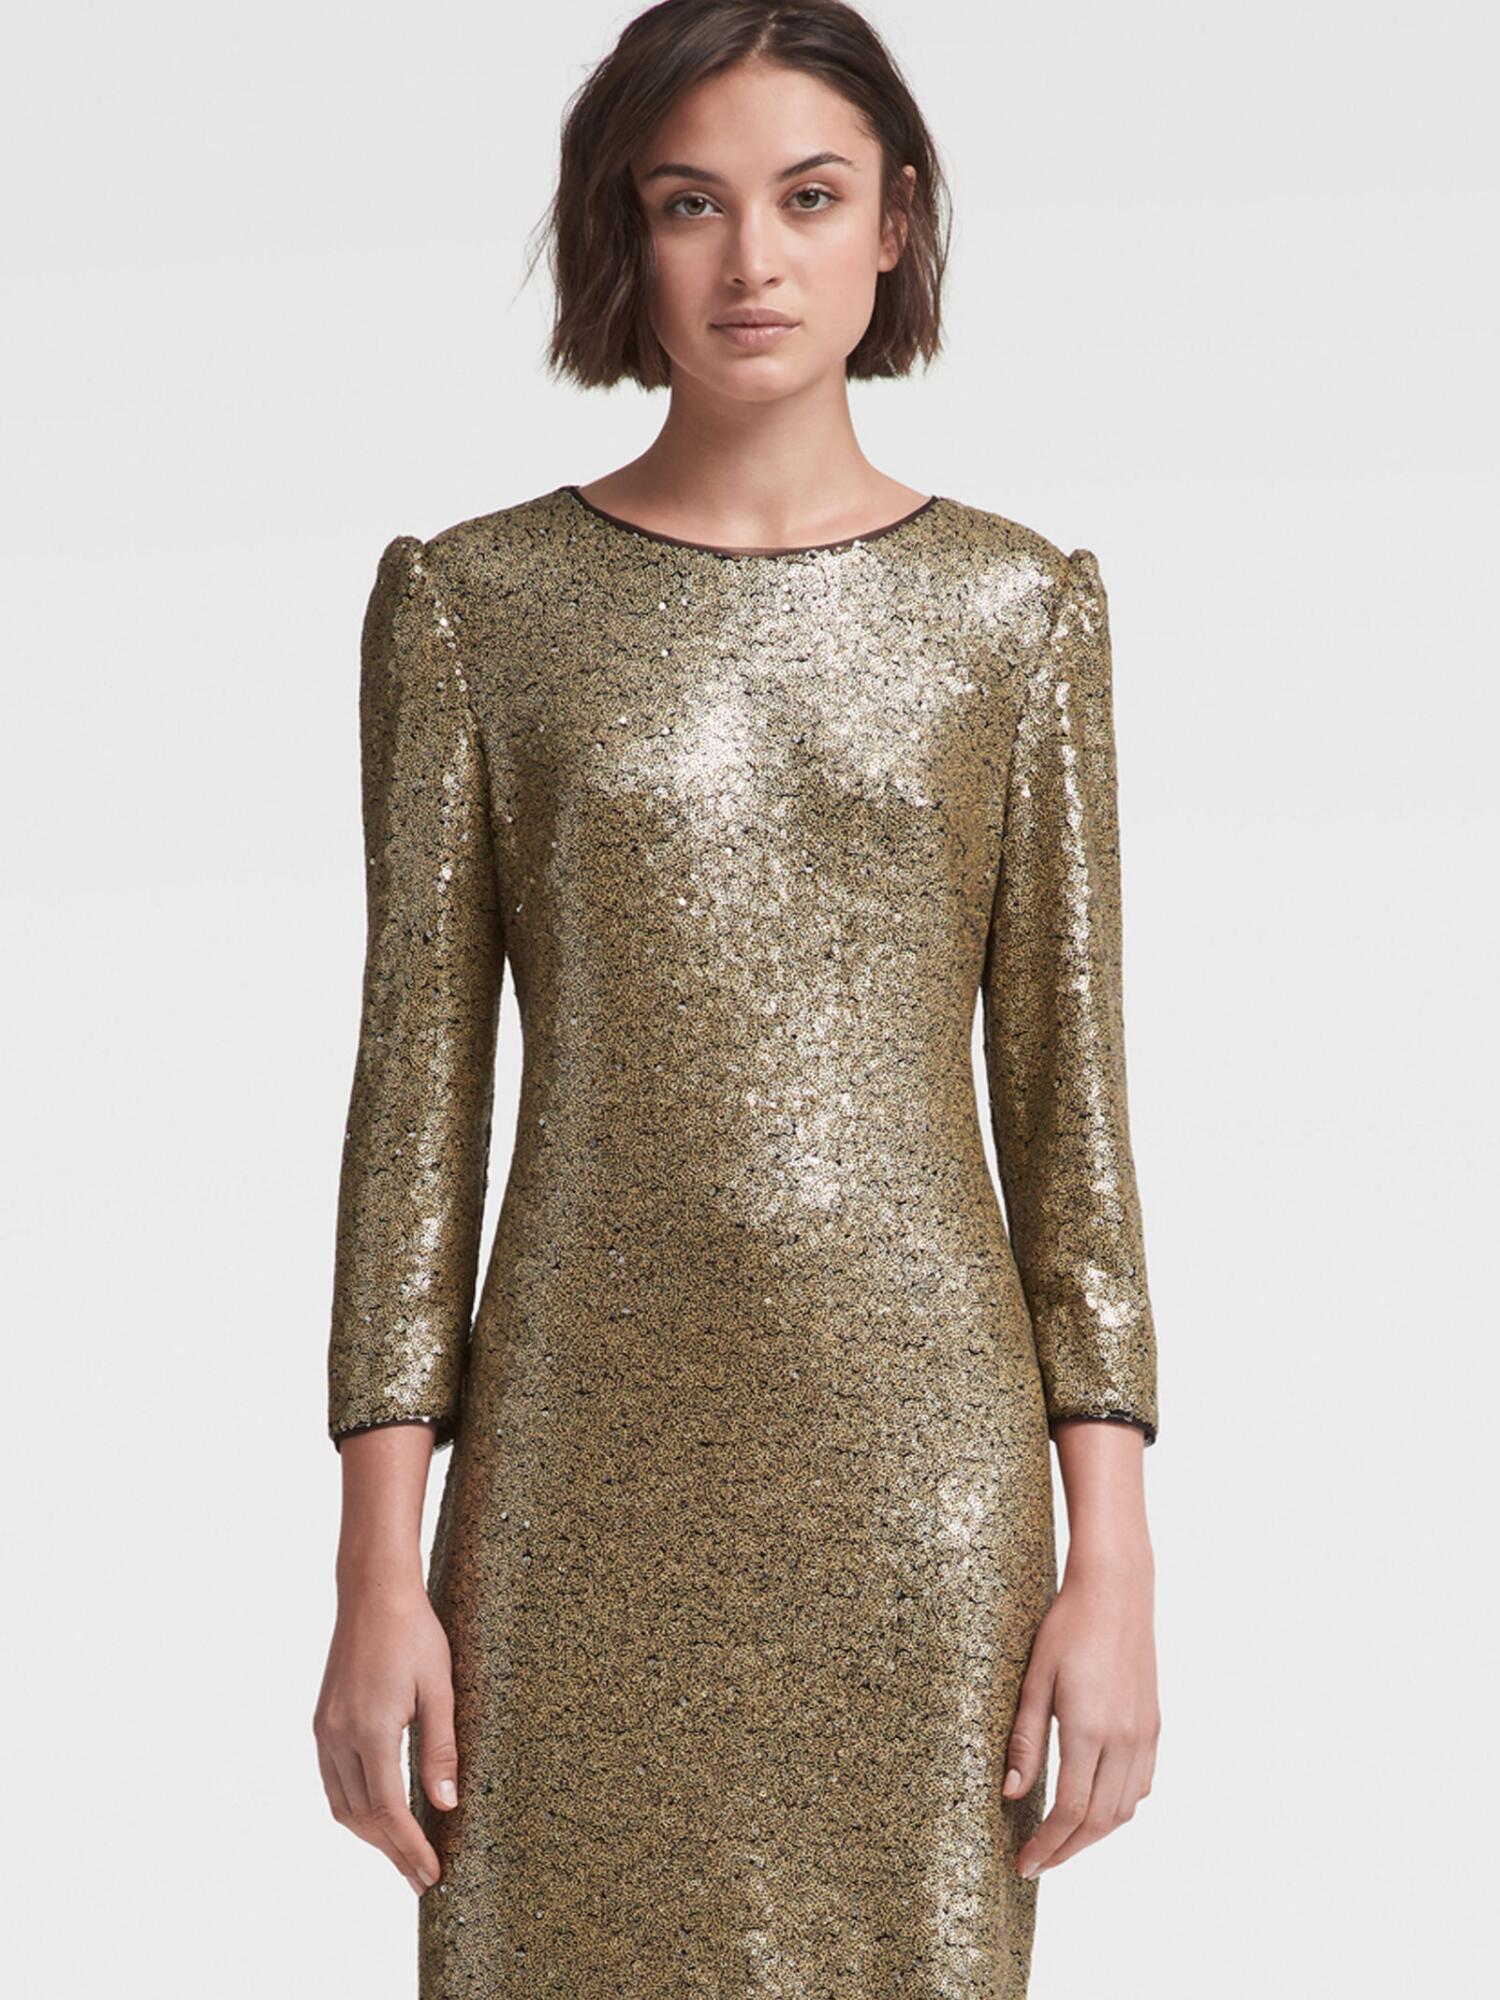 DKNY Synthetic Sequined Dress With Shoulder Detail in Gold (Metallic ...